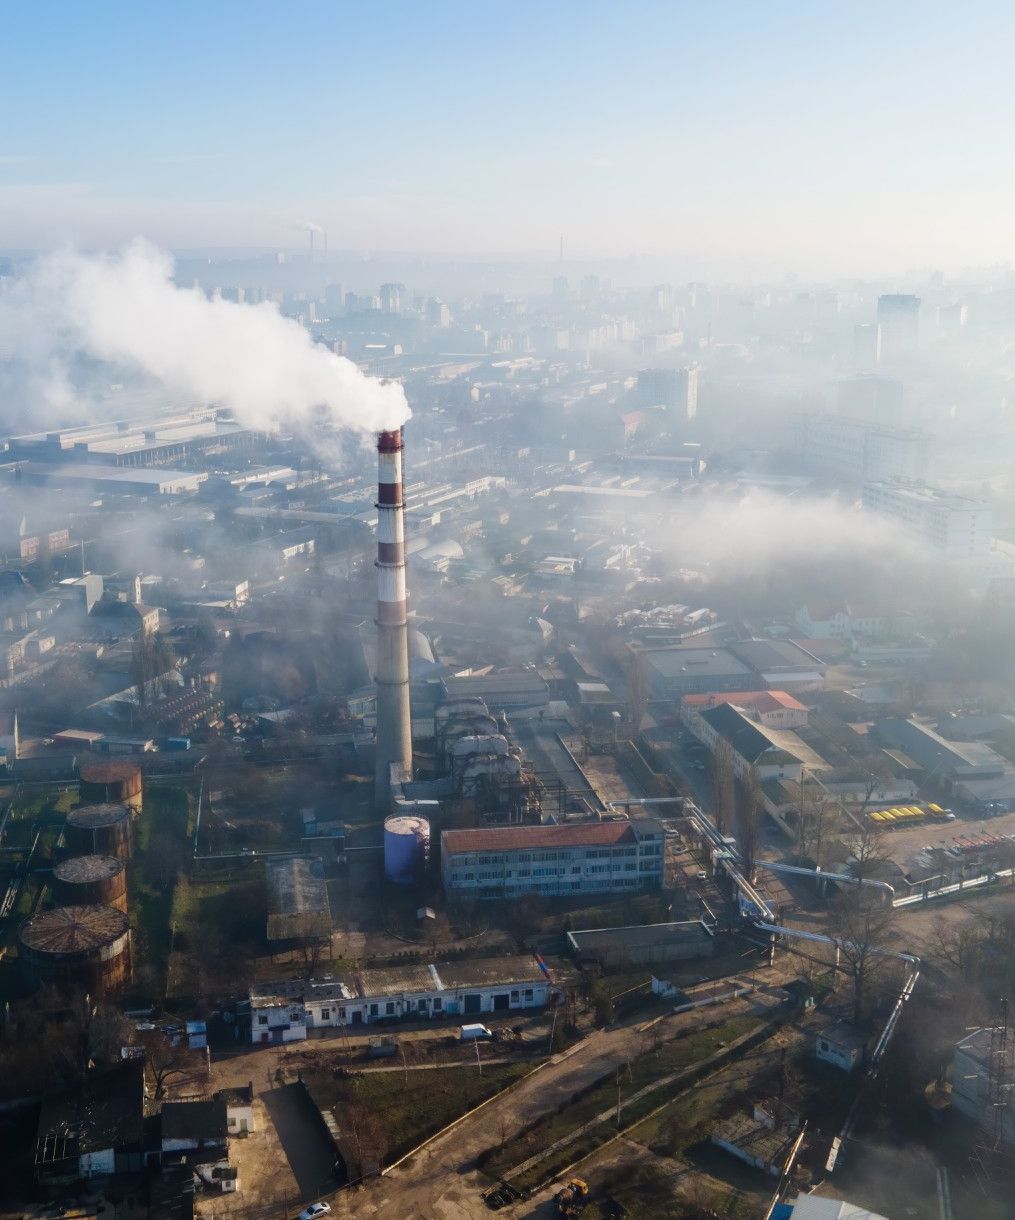 aerial-drone-view-chisinau-thermal-station-with-smoke-coming-out-tube-buildings-roads-fog-air-moldova